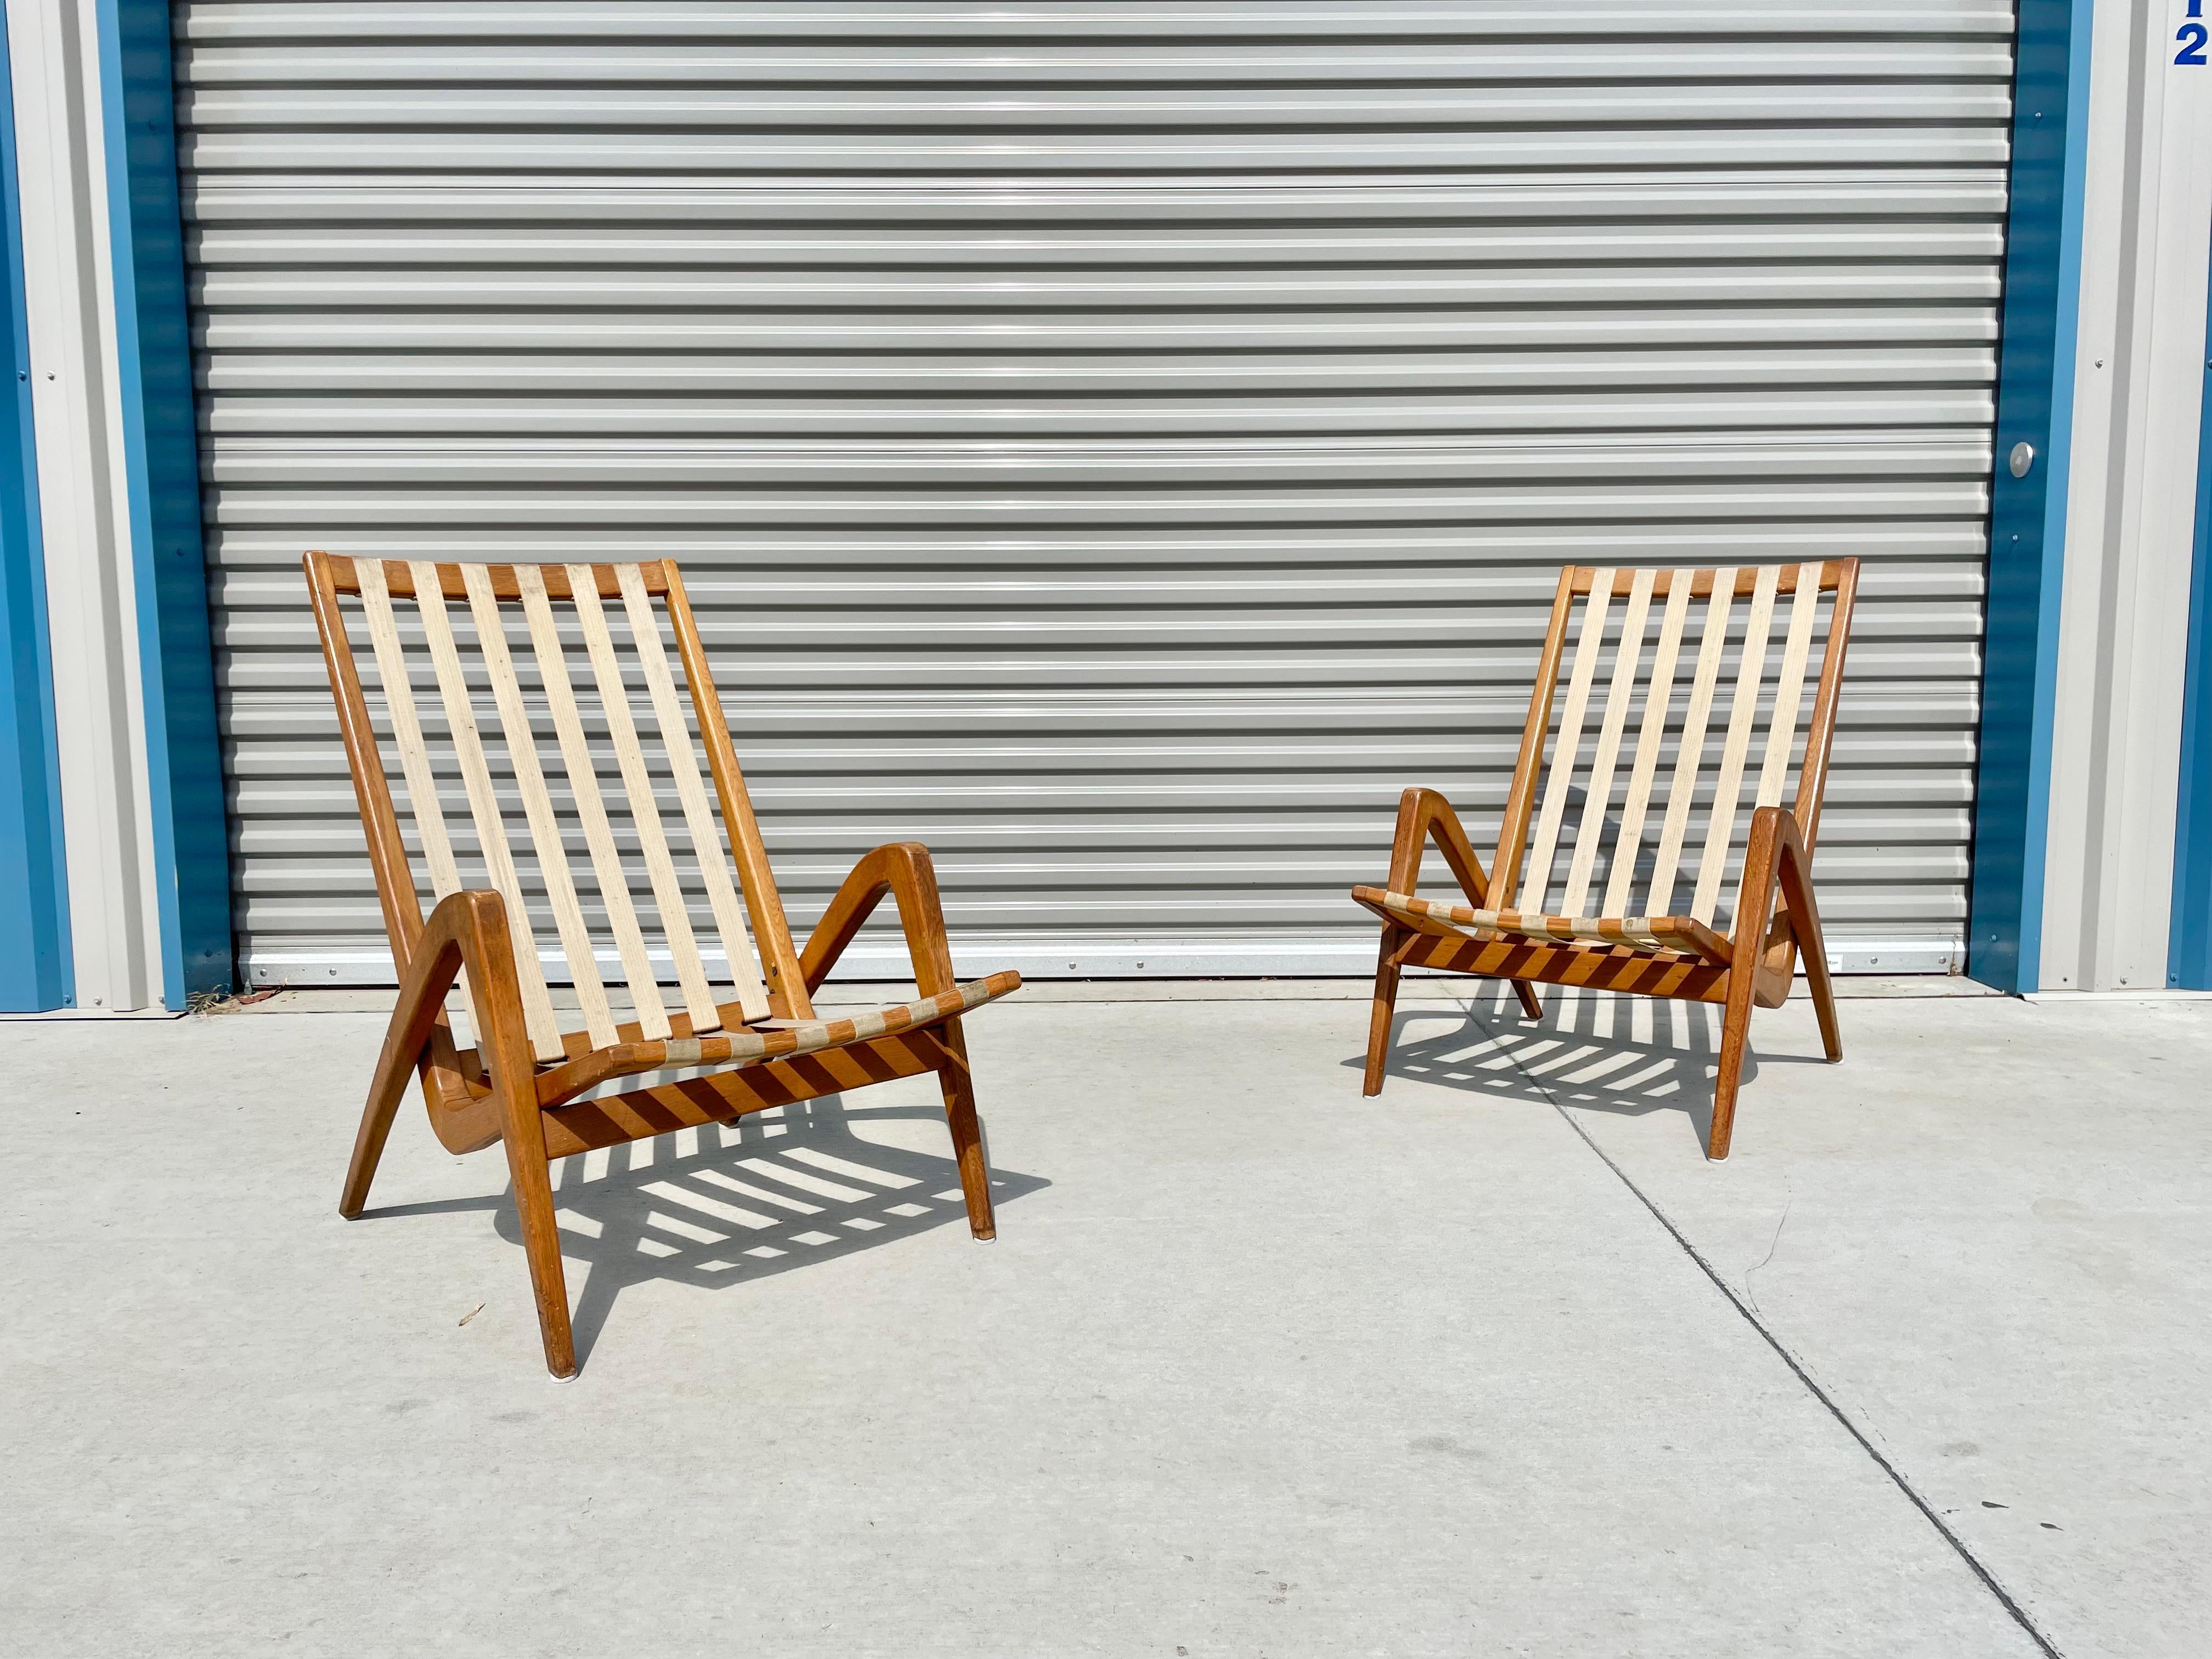 Midcentury floating lounge chairs were designed by Jan Vanek for Uluv Czechosloavkia in Slovenia circa 1960s. These chairs stand out for their floating design because the walnut frames give the illusion that the chairs are floating. These chairs